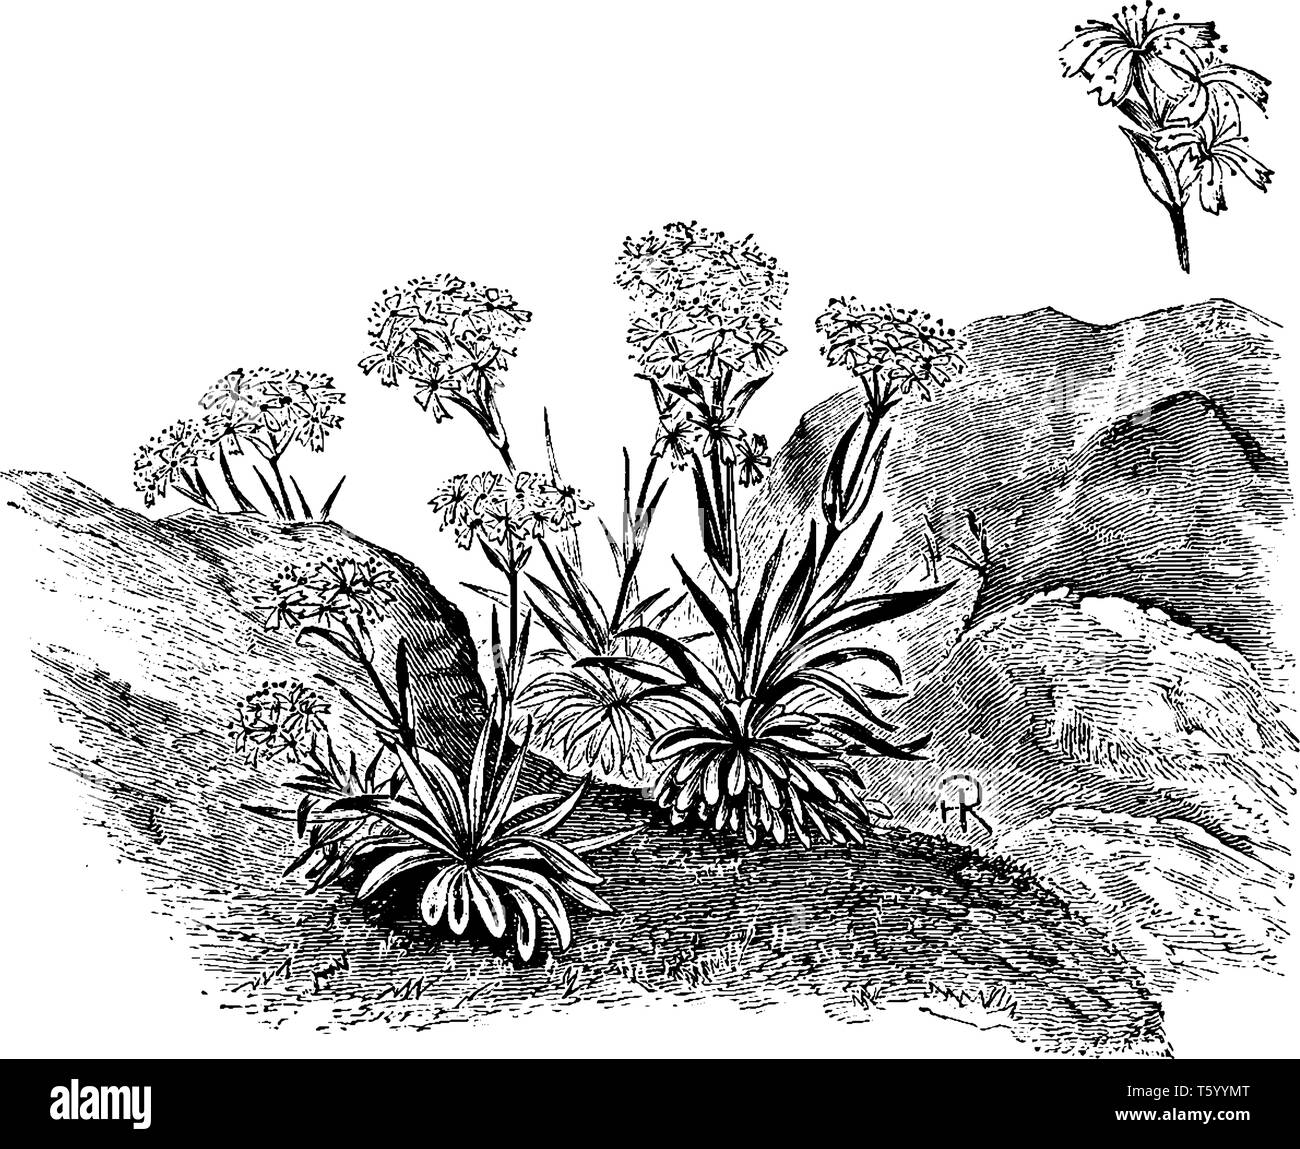 Lychnis Alpina is a flowering plant. It has bright-pink flowers and grassy leaves, vintage line drawing or engraving illustration. Stock Vector